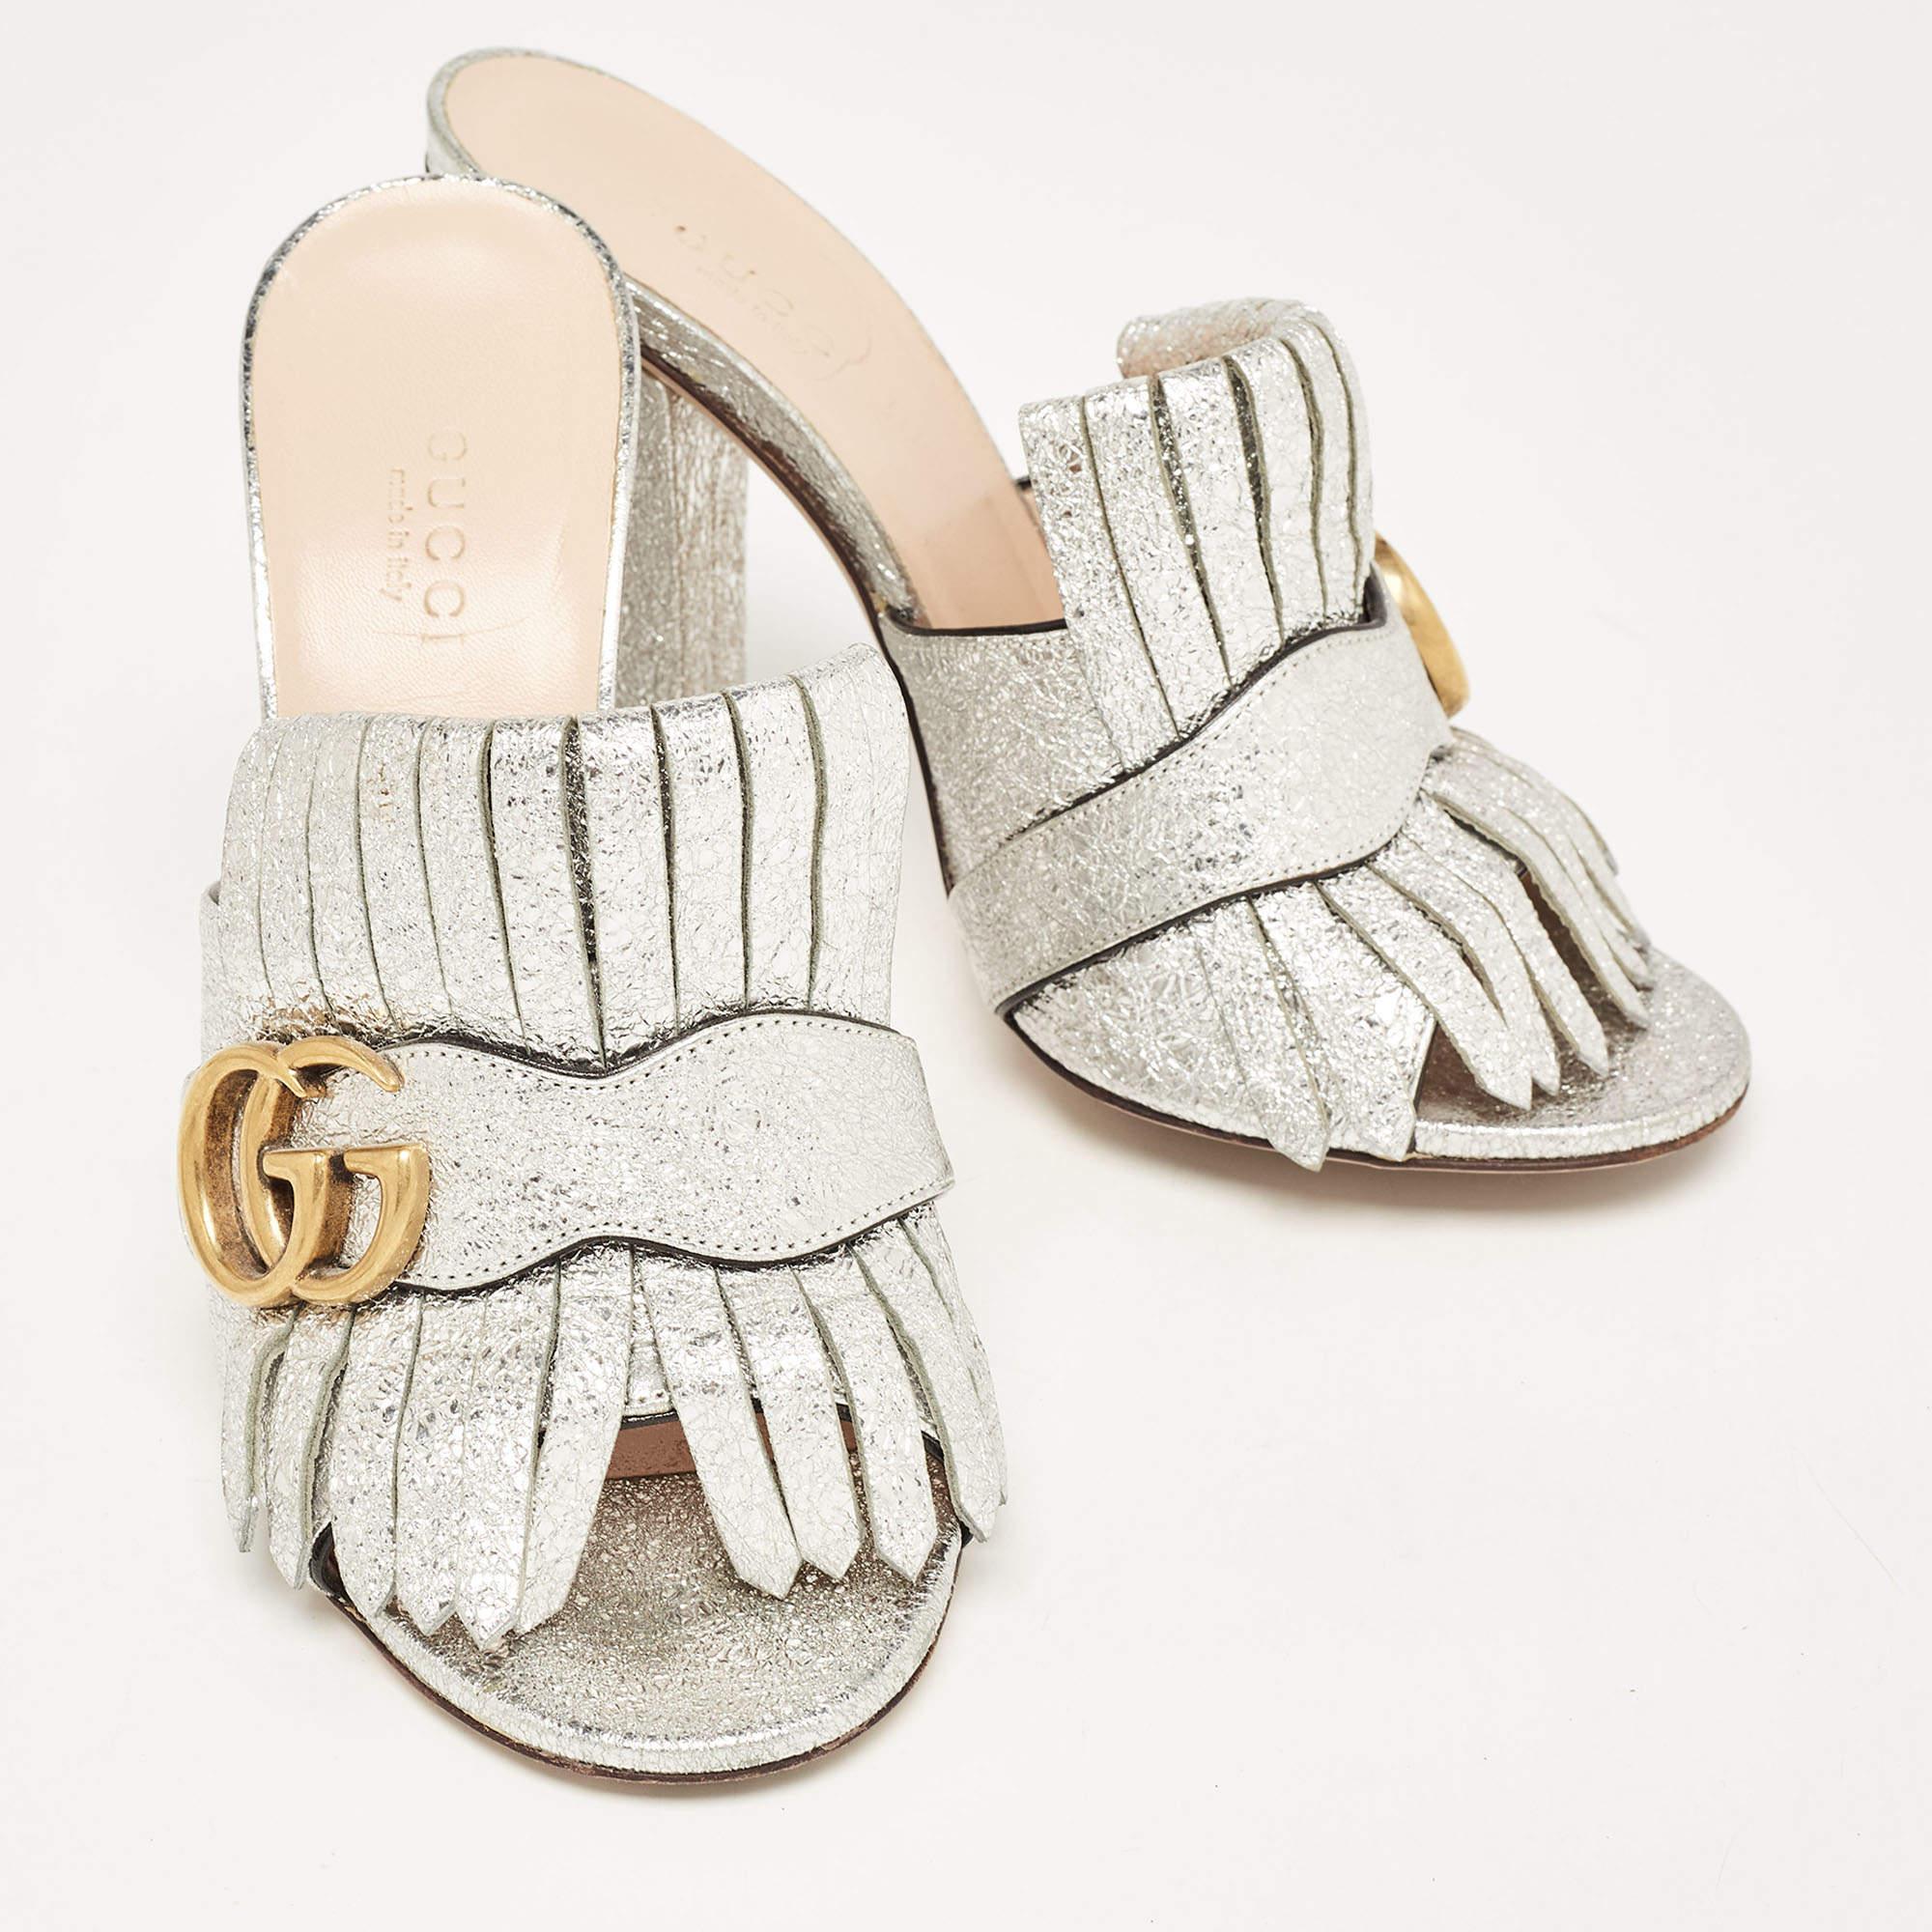 Gucci Silver Crackle Leather GG Marmont Fringed Slide Sandals Size 36 In Good Condition For Sale In Dubai, Al Qouz 2